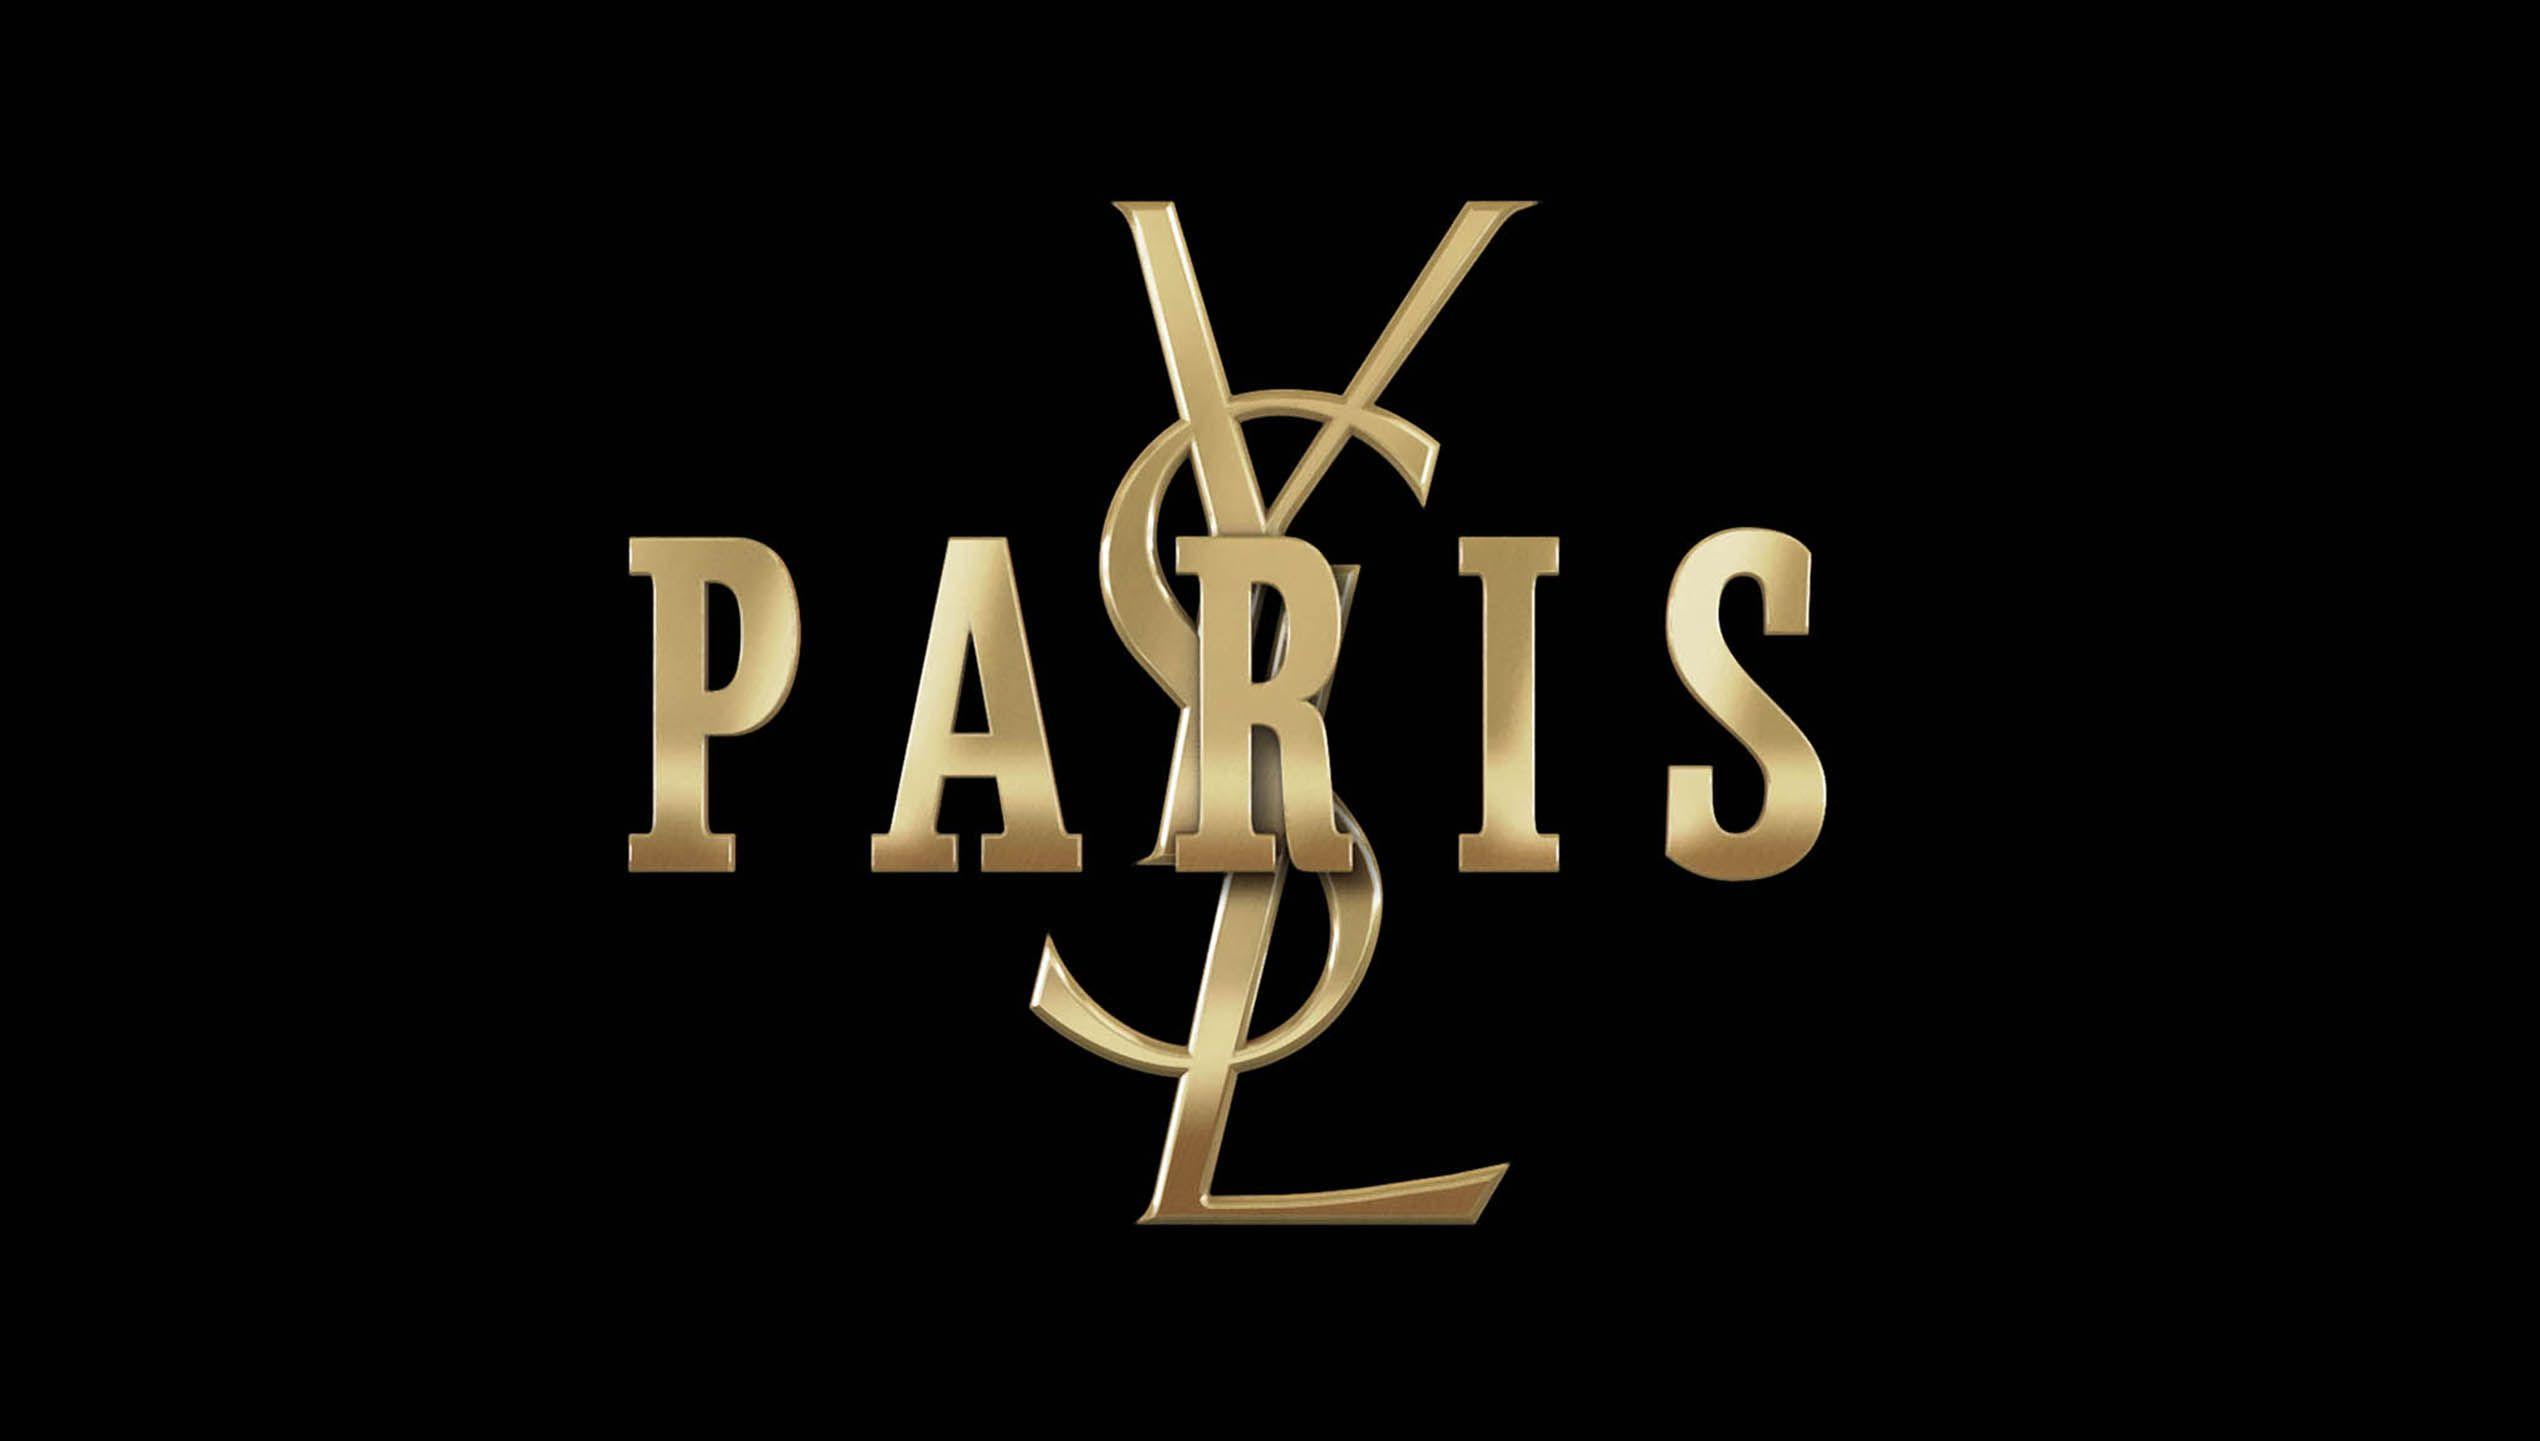 Yves Saint Laurent Logo and HQ Wallpaper. Full HD Picture